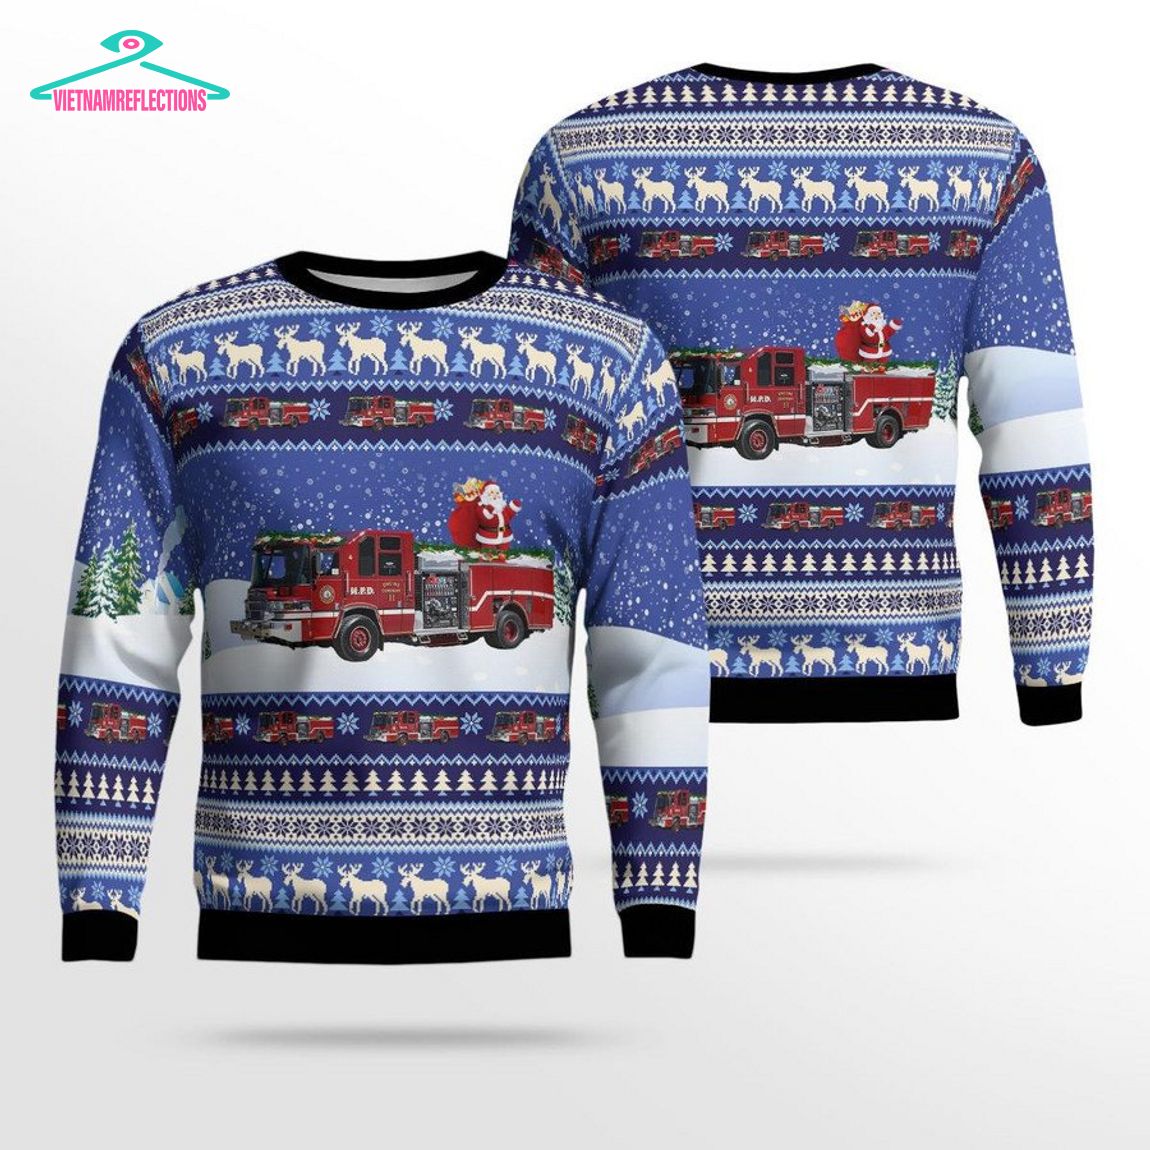 Wisconsin City of Madison Fire Department 3D Christmas Sweater